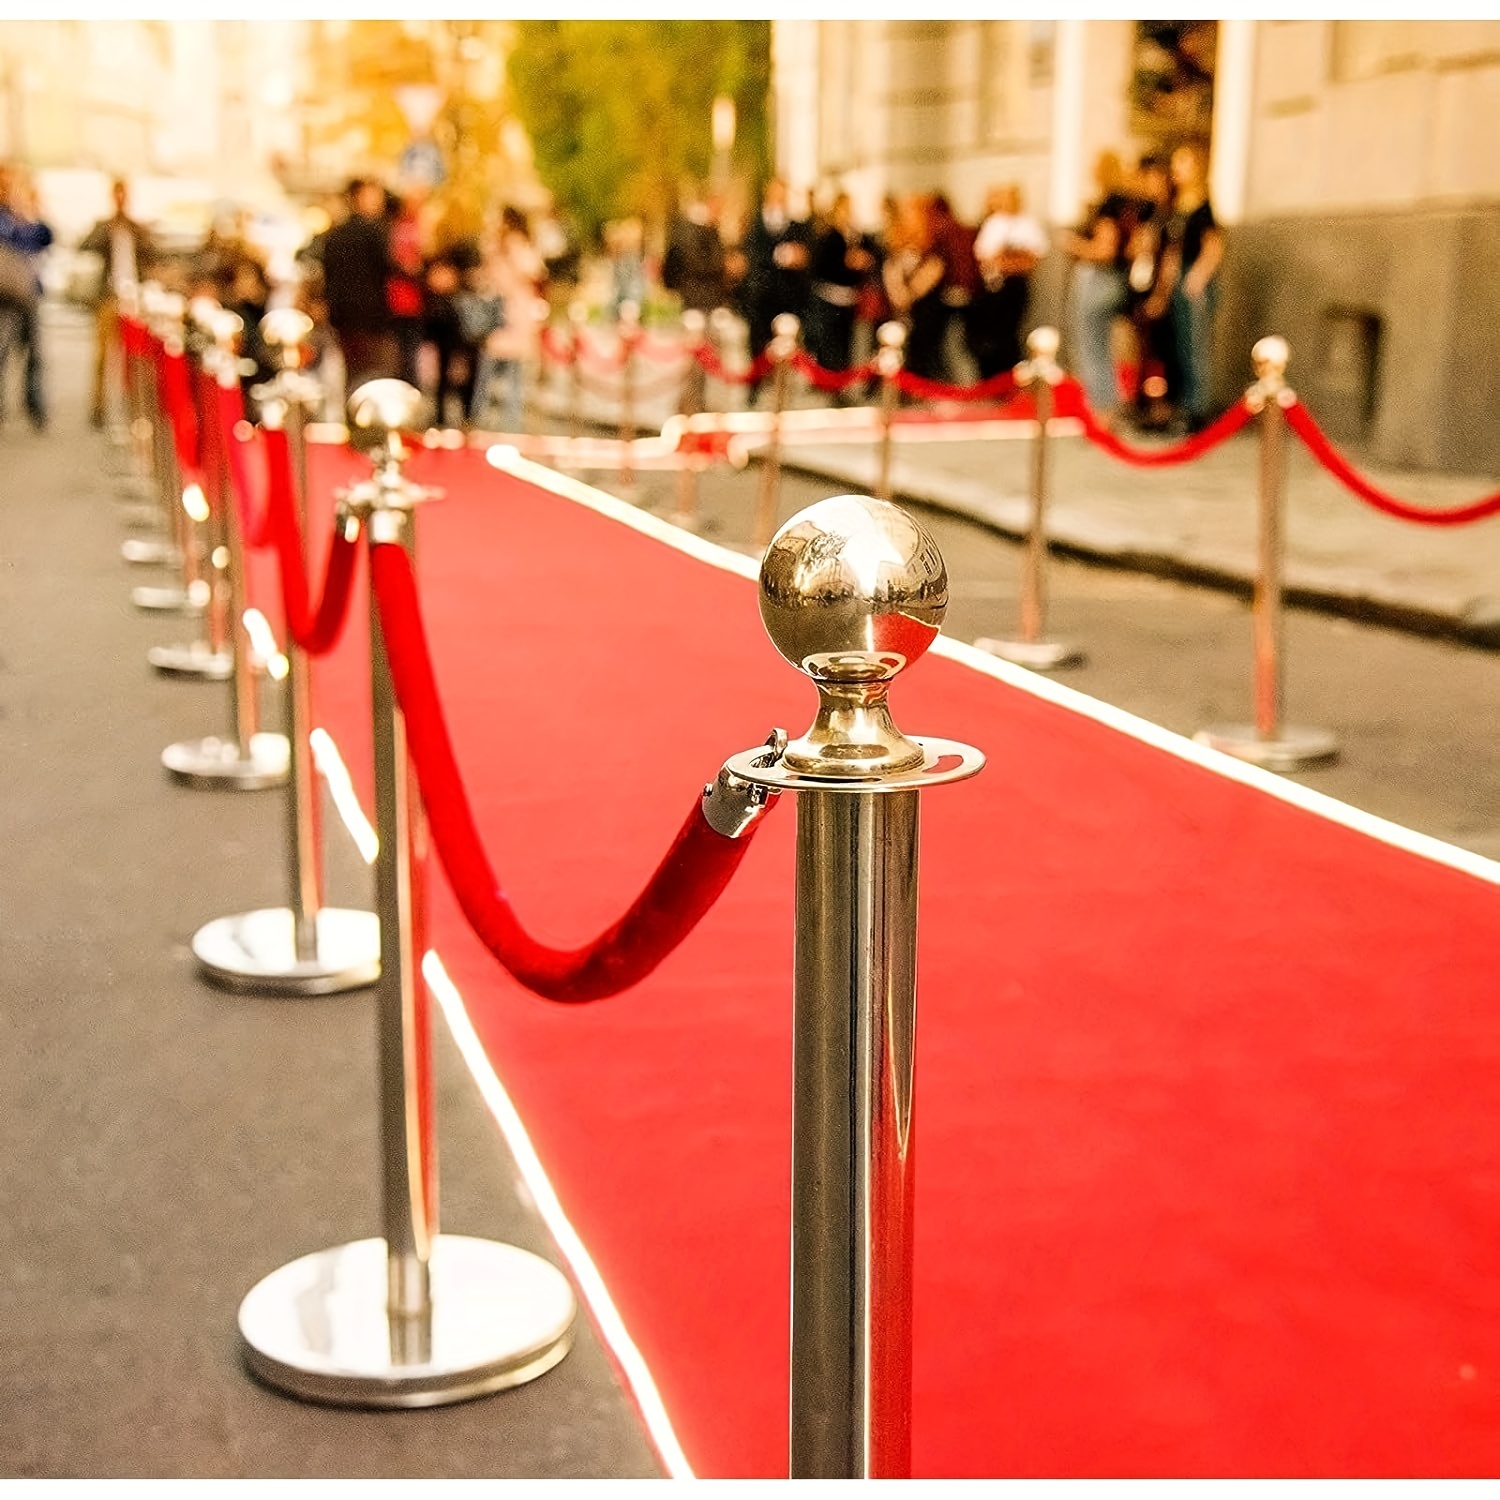 Red Velvet Rope Fixed Rope 4.9 Feet (about 1.5 Meters) Crowd Control  Barrier With Polished Golden Hook